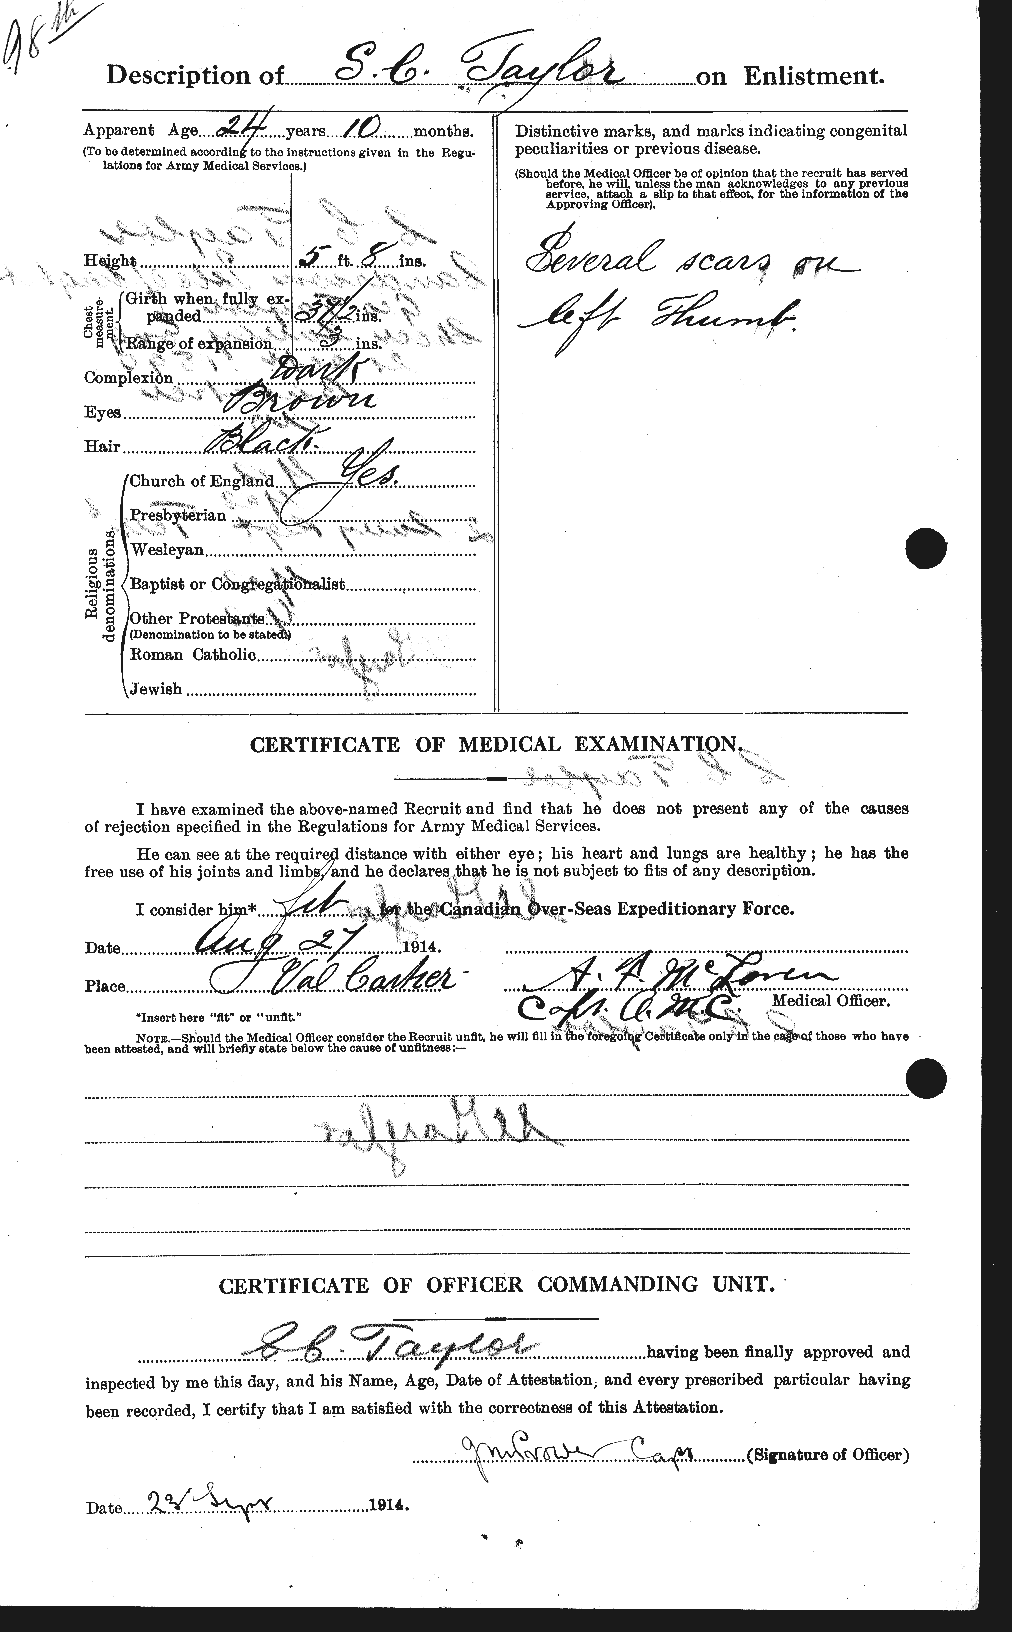 Personnel Records of the First World War - CEF 627545b